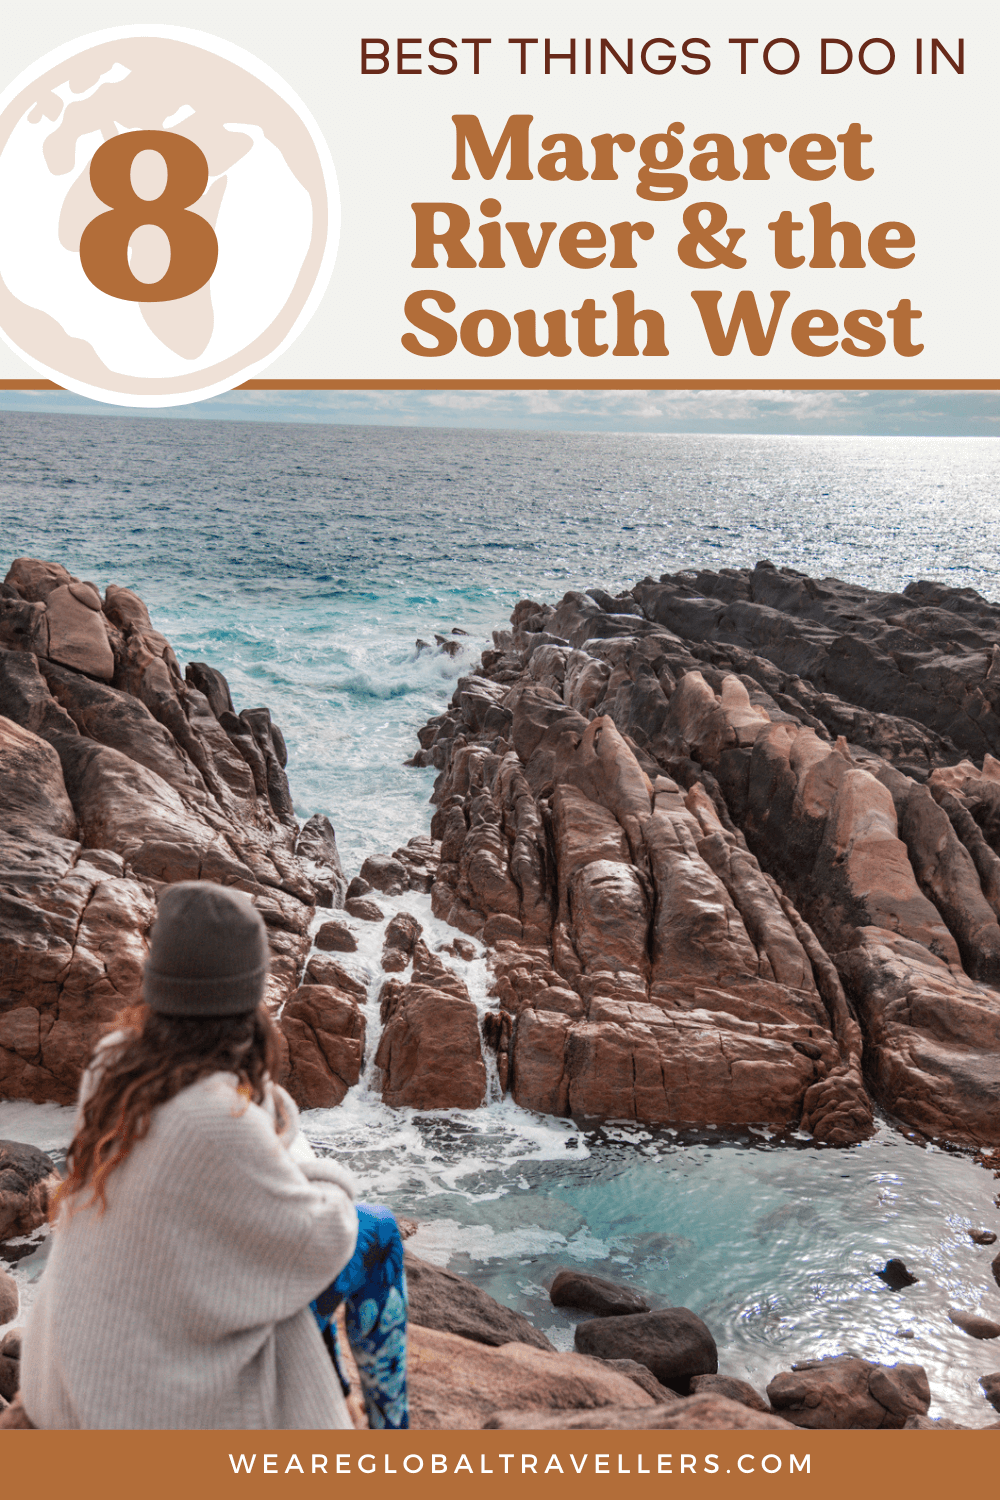 The best things to do in Margaret River and the South West, Australia